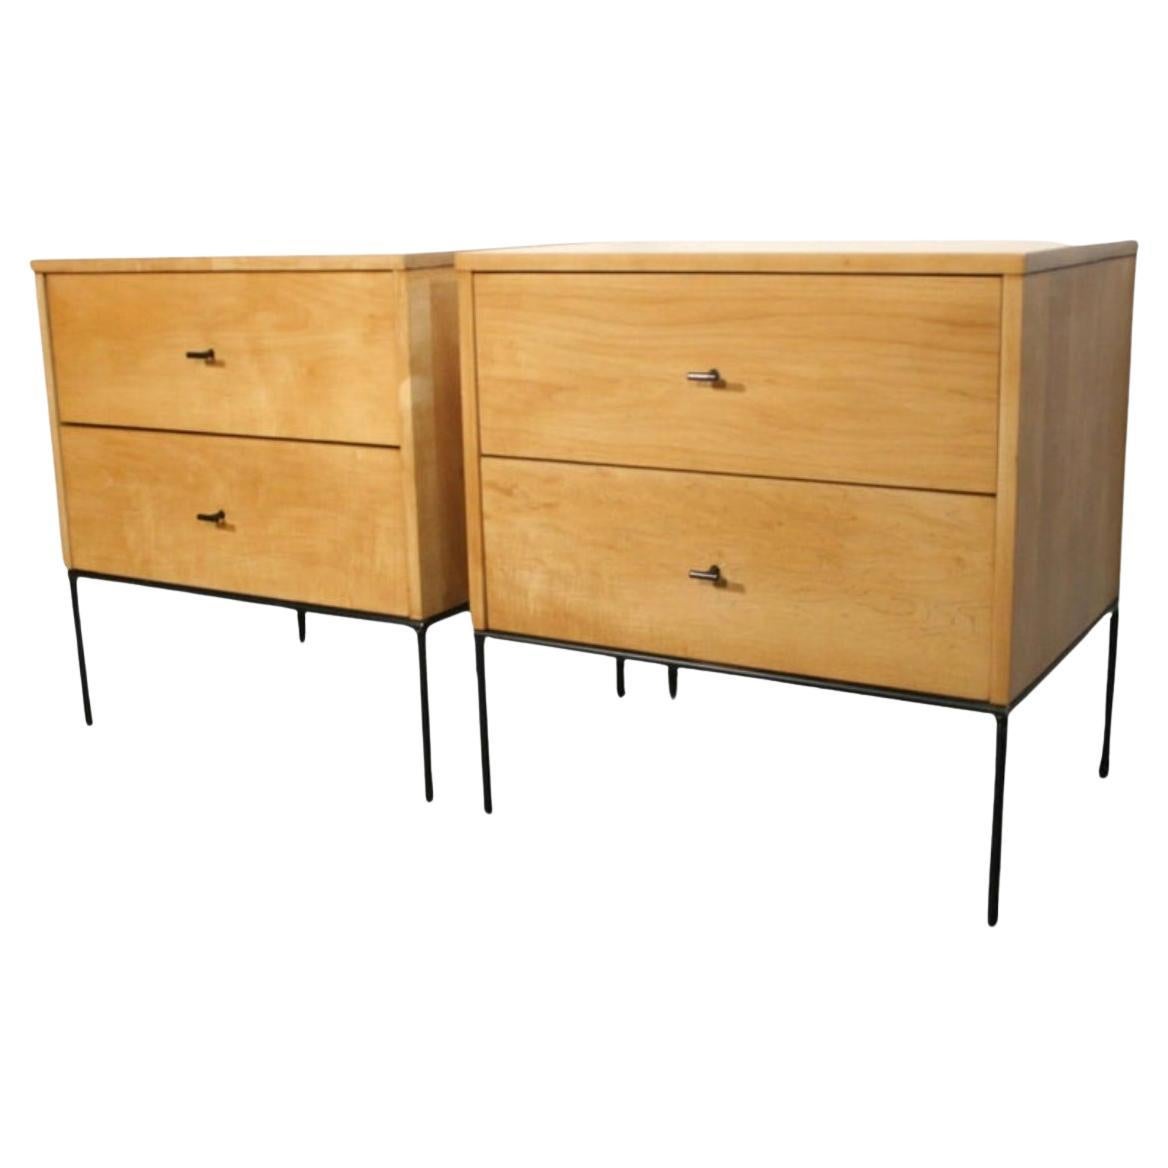 Midcentury Paul McCobb 2 Drawer #1503 Nightstands Blonde Lacquer T Pulls